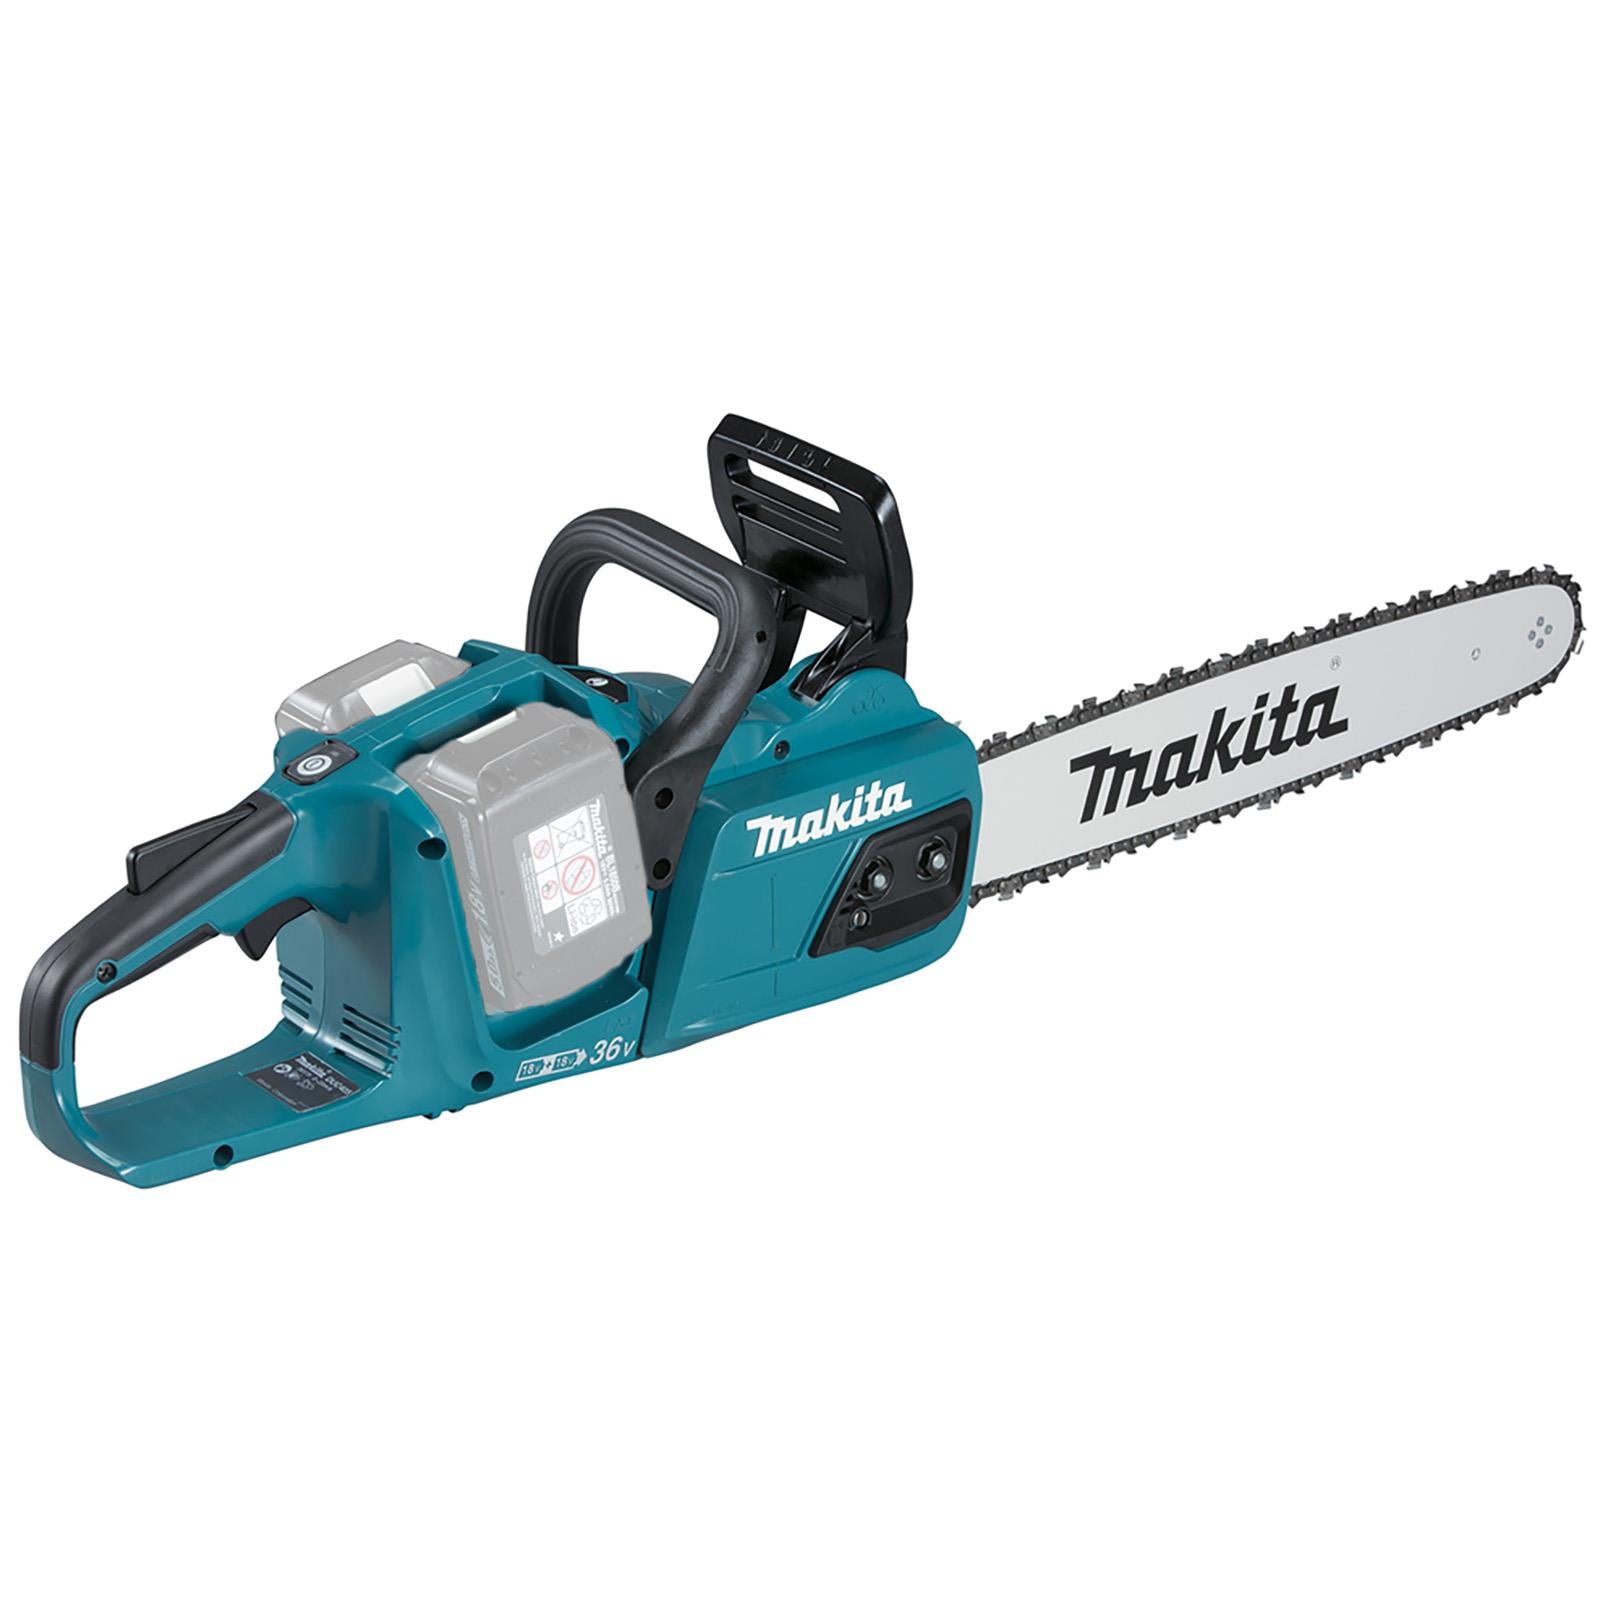 Makita Chainsaw 40cm 16" 18V x 2 LXT Brushless Cordless Garden Tree Cutting Pruning Bare Unit Body Only DUC405Z